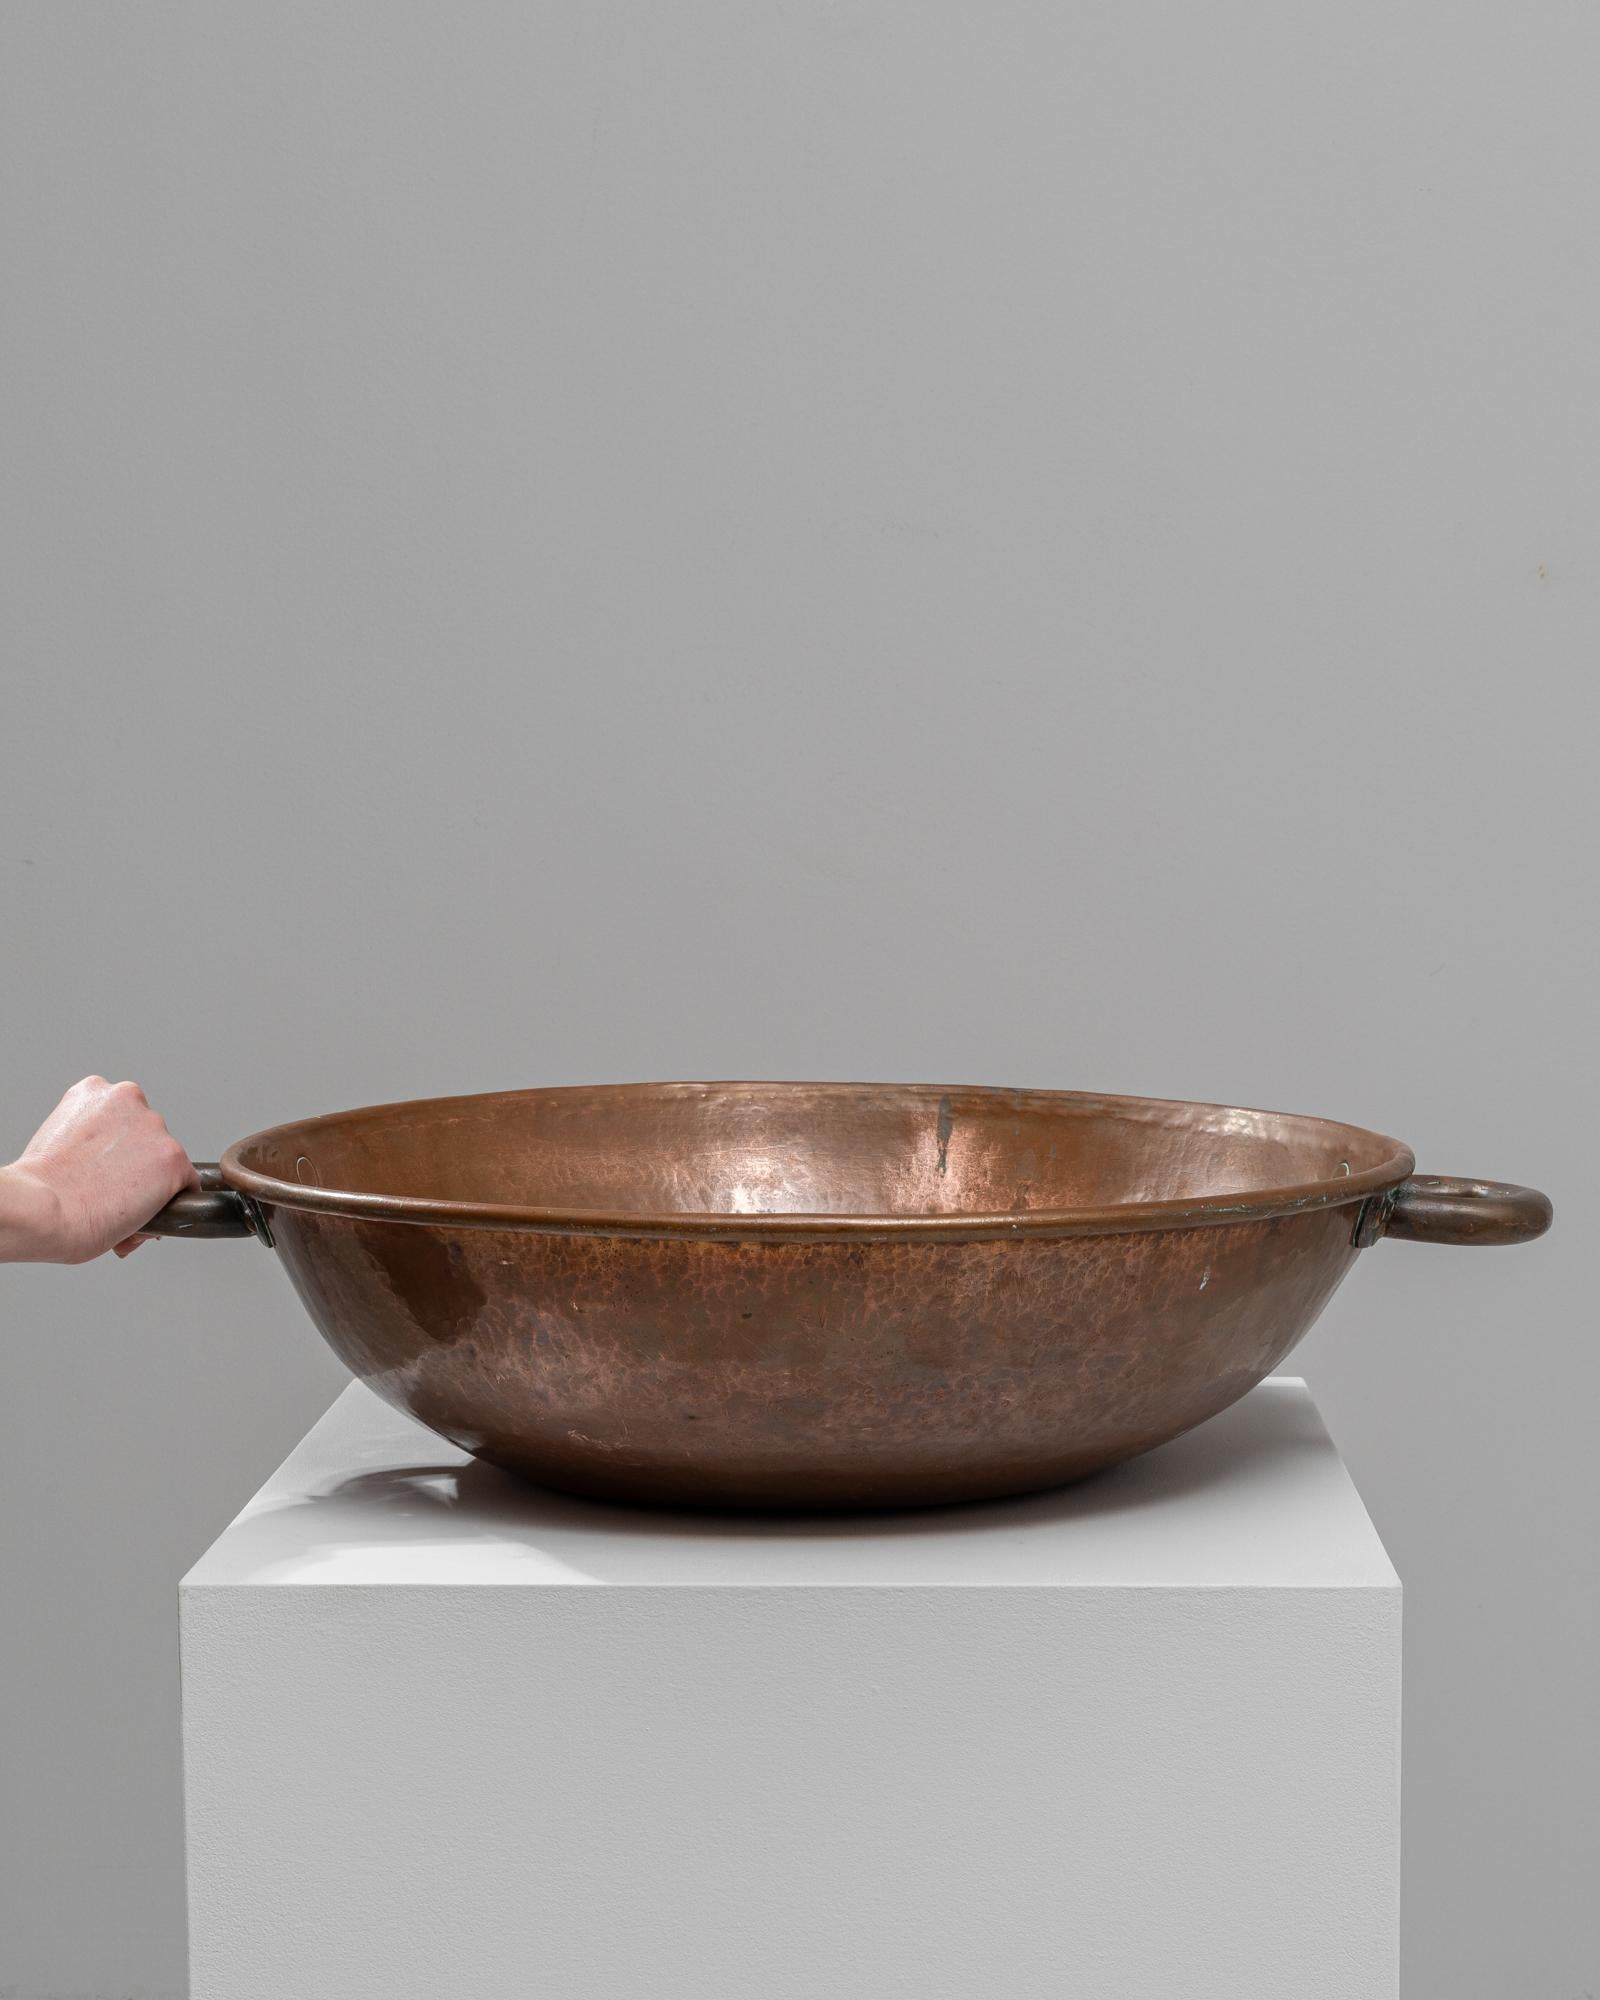 Add a touch of vintage elegance to your kitchen or dining area with this exquisite 19th-century French copper bowl. Crafted from high-quality copper, this bowl showcases a rich, warm patina that only centuries of use can produce, giving it a